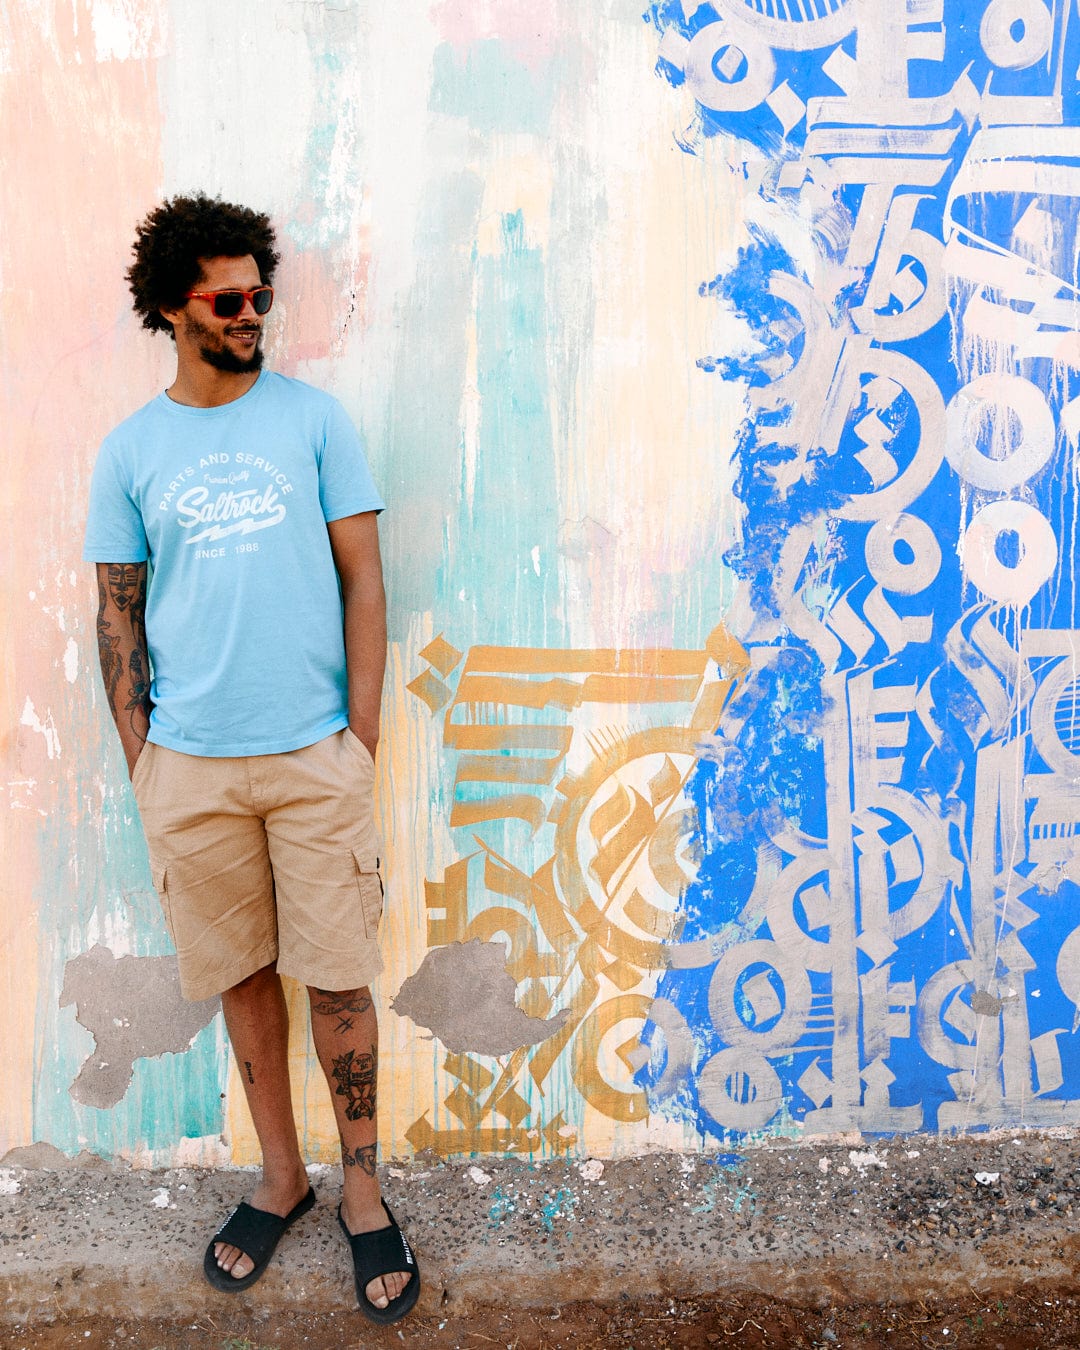 A man in a Last Stop Motel - Mens T-Shirt - Light Blue from Saltrock and beige shorts stands smiling against a colorful graffiti wall.